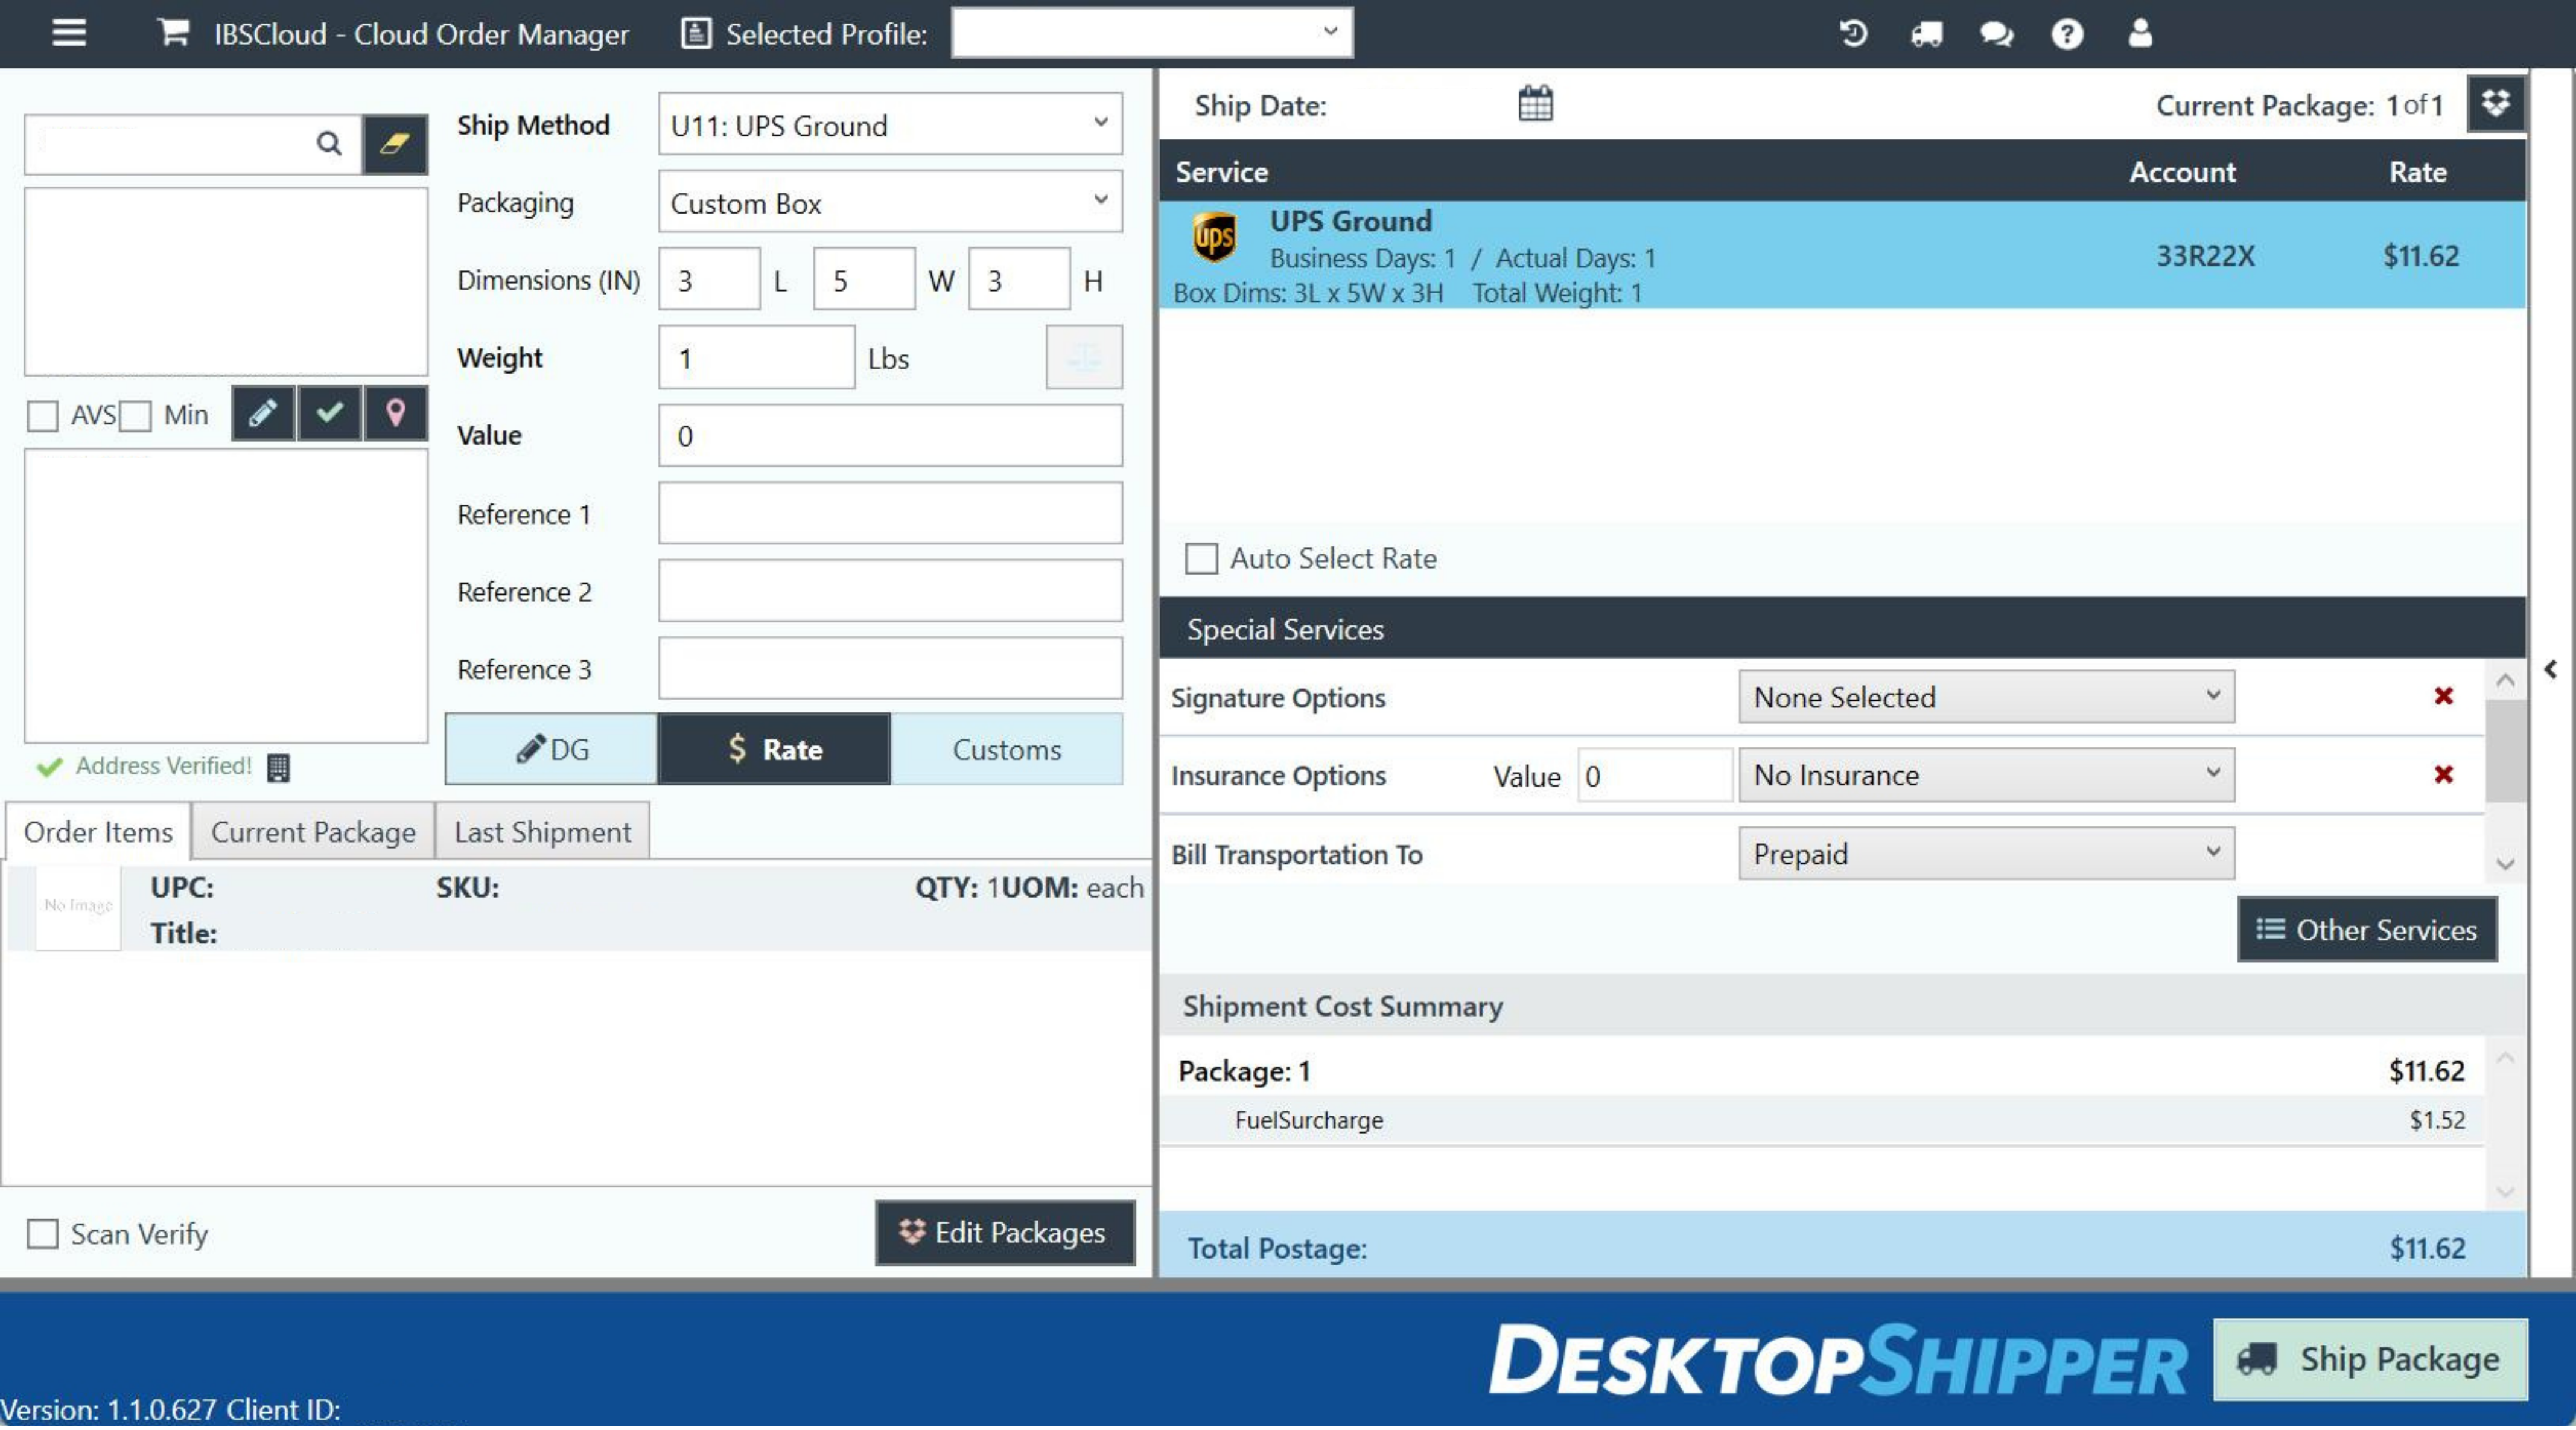 DSX is DesktopShipper's app for workstation-based shipping. Simplify your shipping process and enjoy the flexibility and customizability that DSX has to offer. With direct database connectivity, it streamlines packing, shipping, and printing tasks.